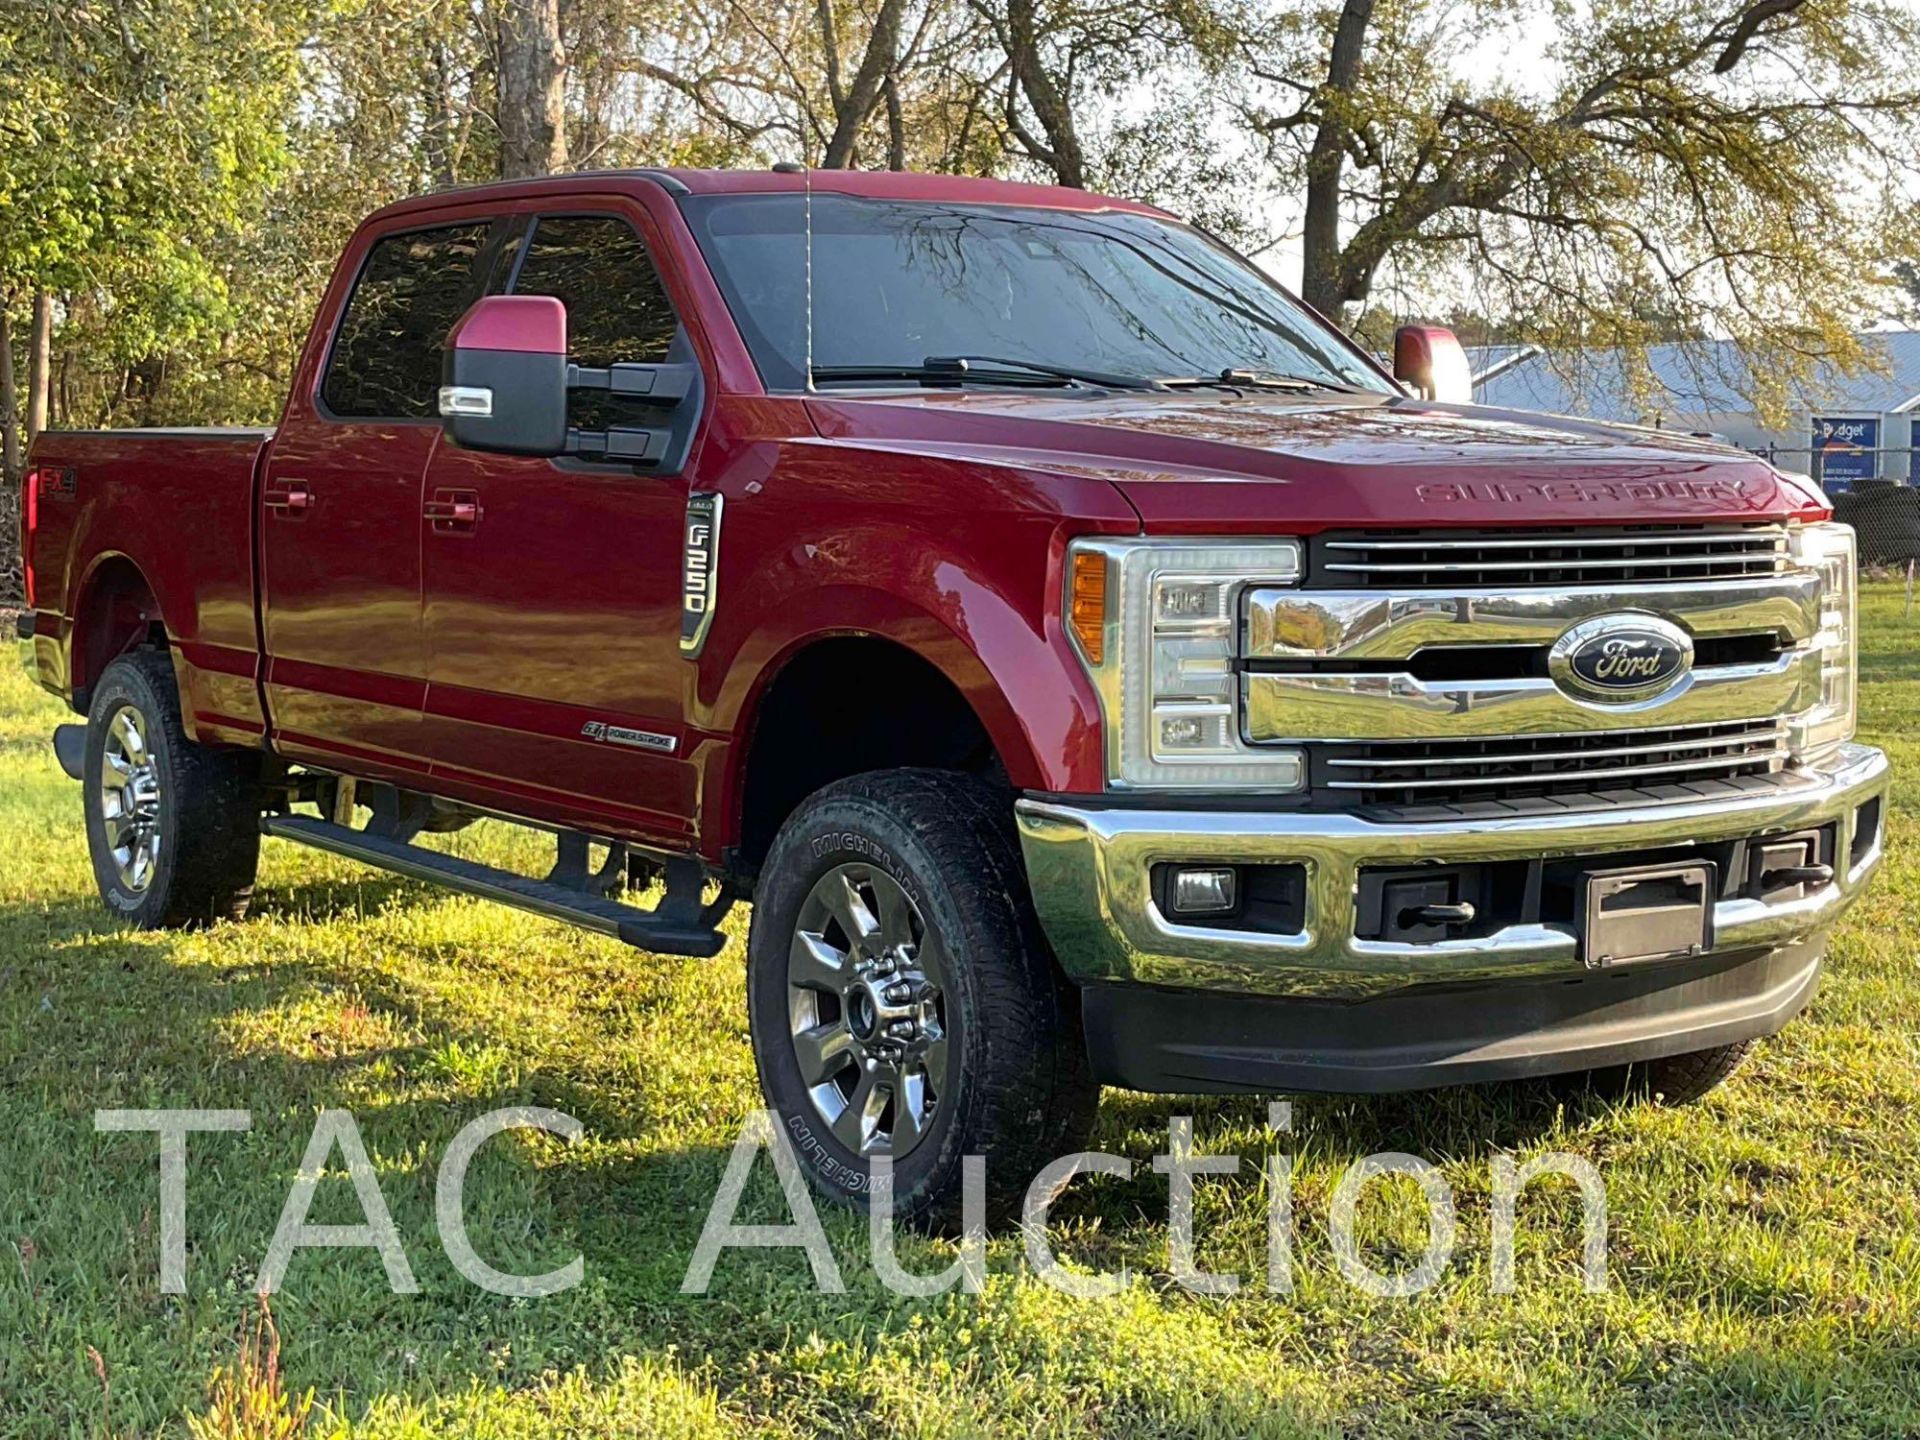 2017 Ford F250 Lariat 4x4 Crew Cab Pickup Truck - Image 7 of 50